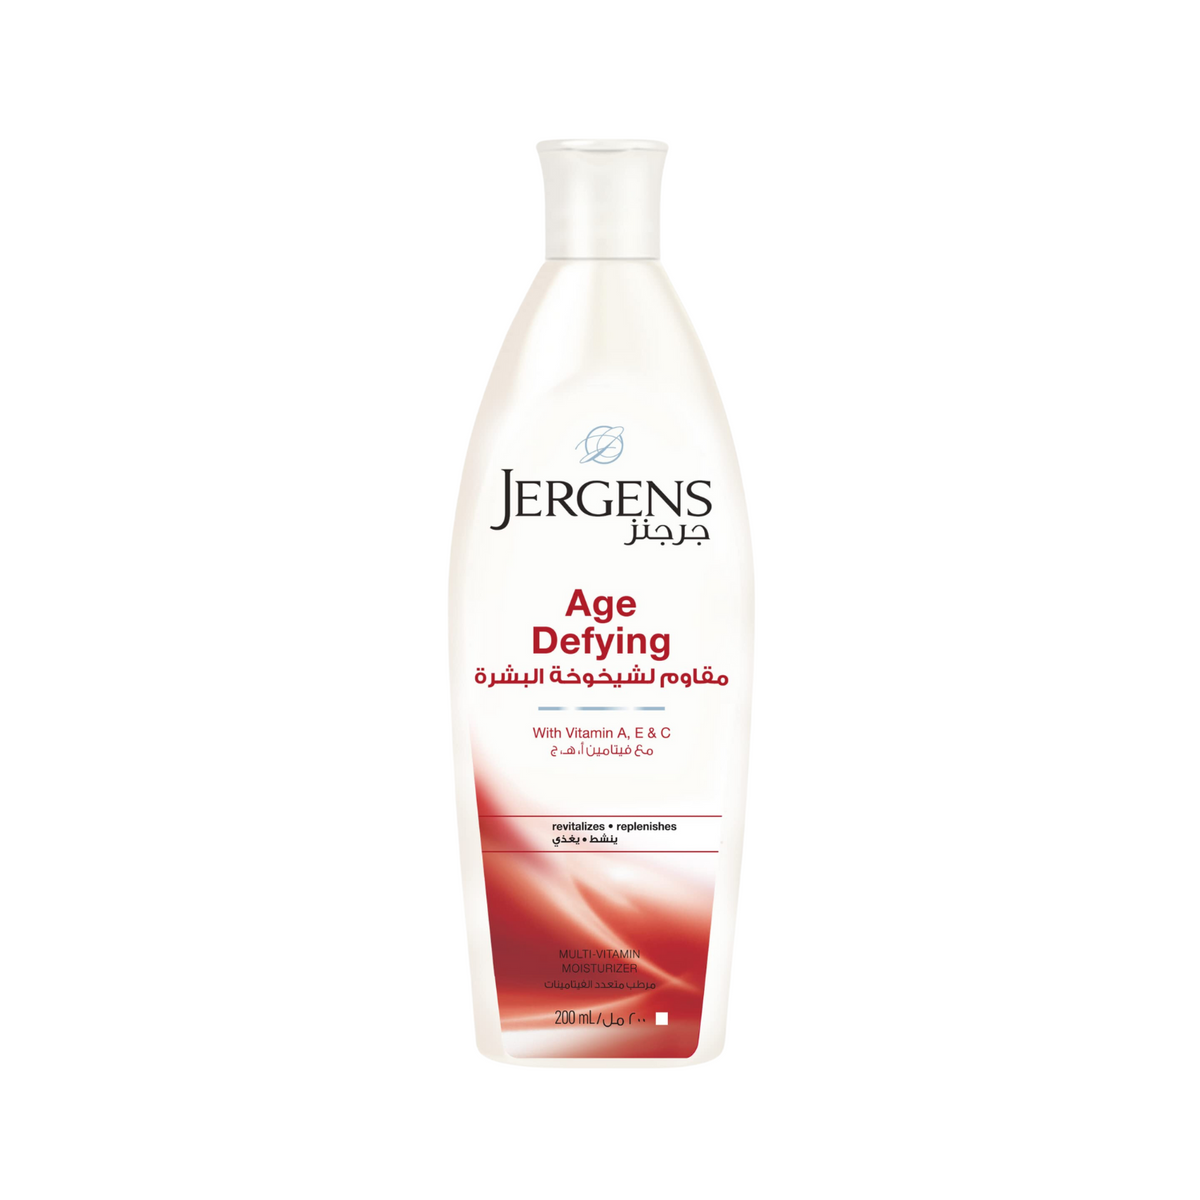 jergens-age-defying-with-vitamin-a-e-c-200ml